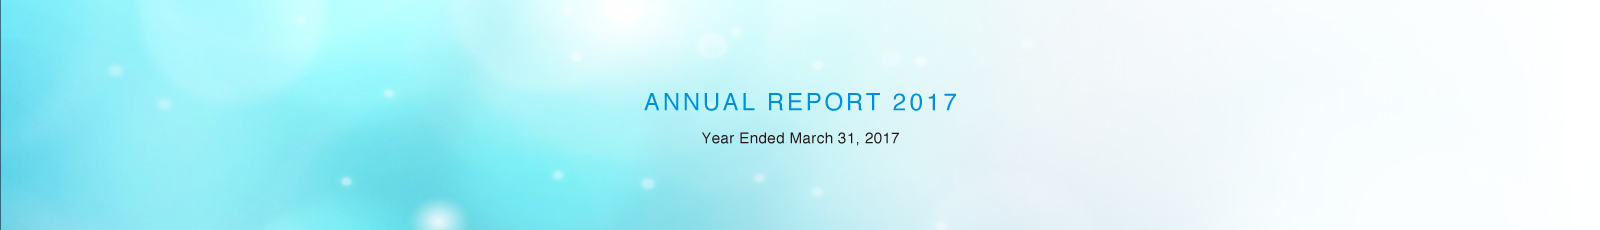 Annual Report 2017/Year ended March 31, 2017